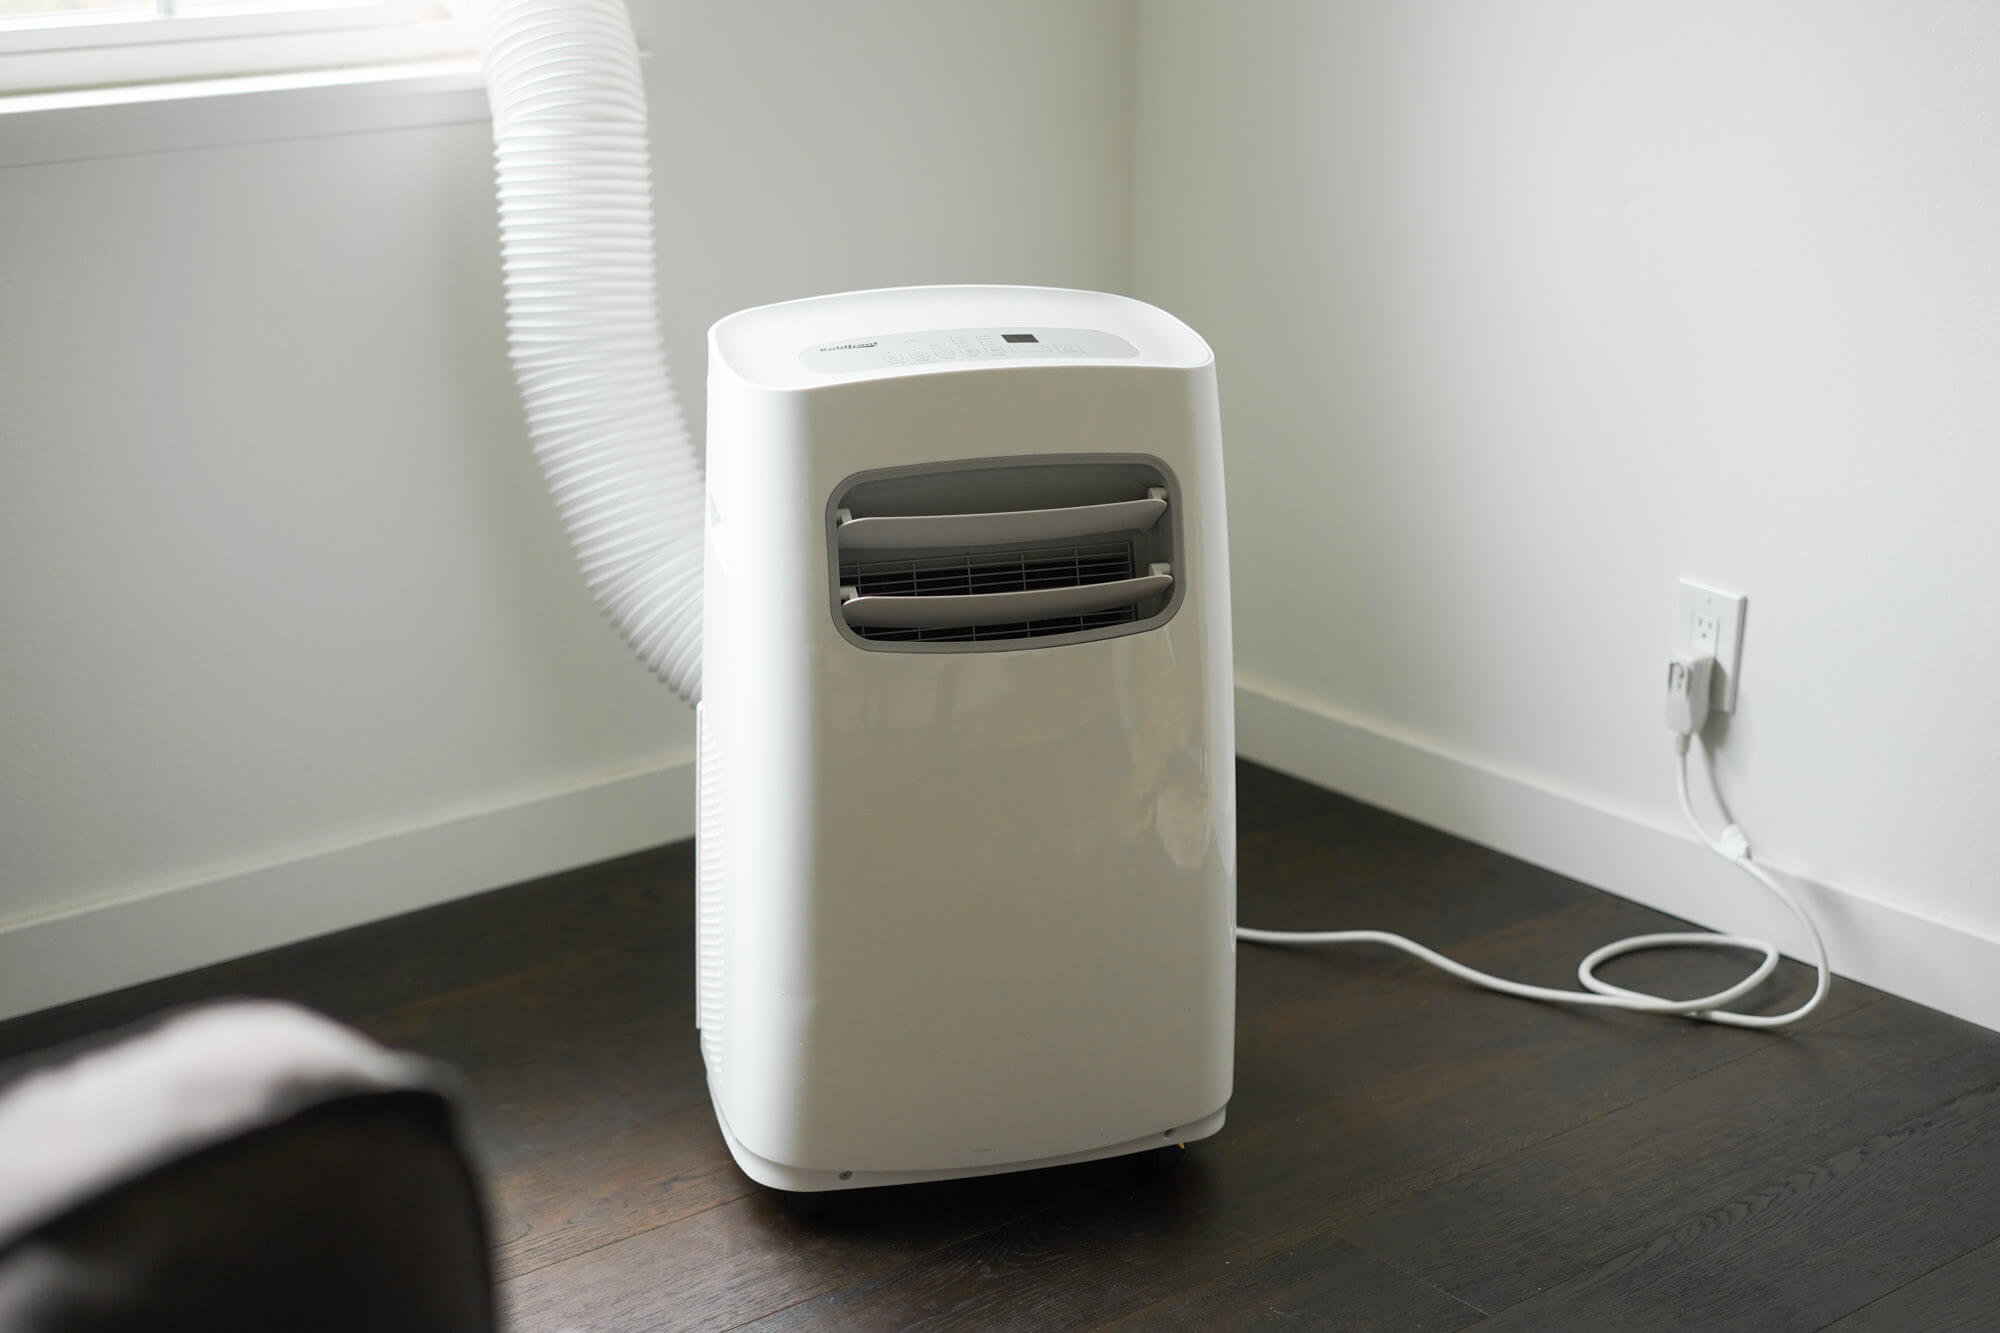 Best Portable Ac For Living Room